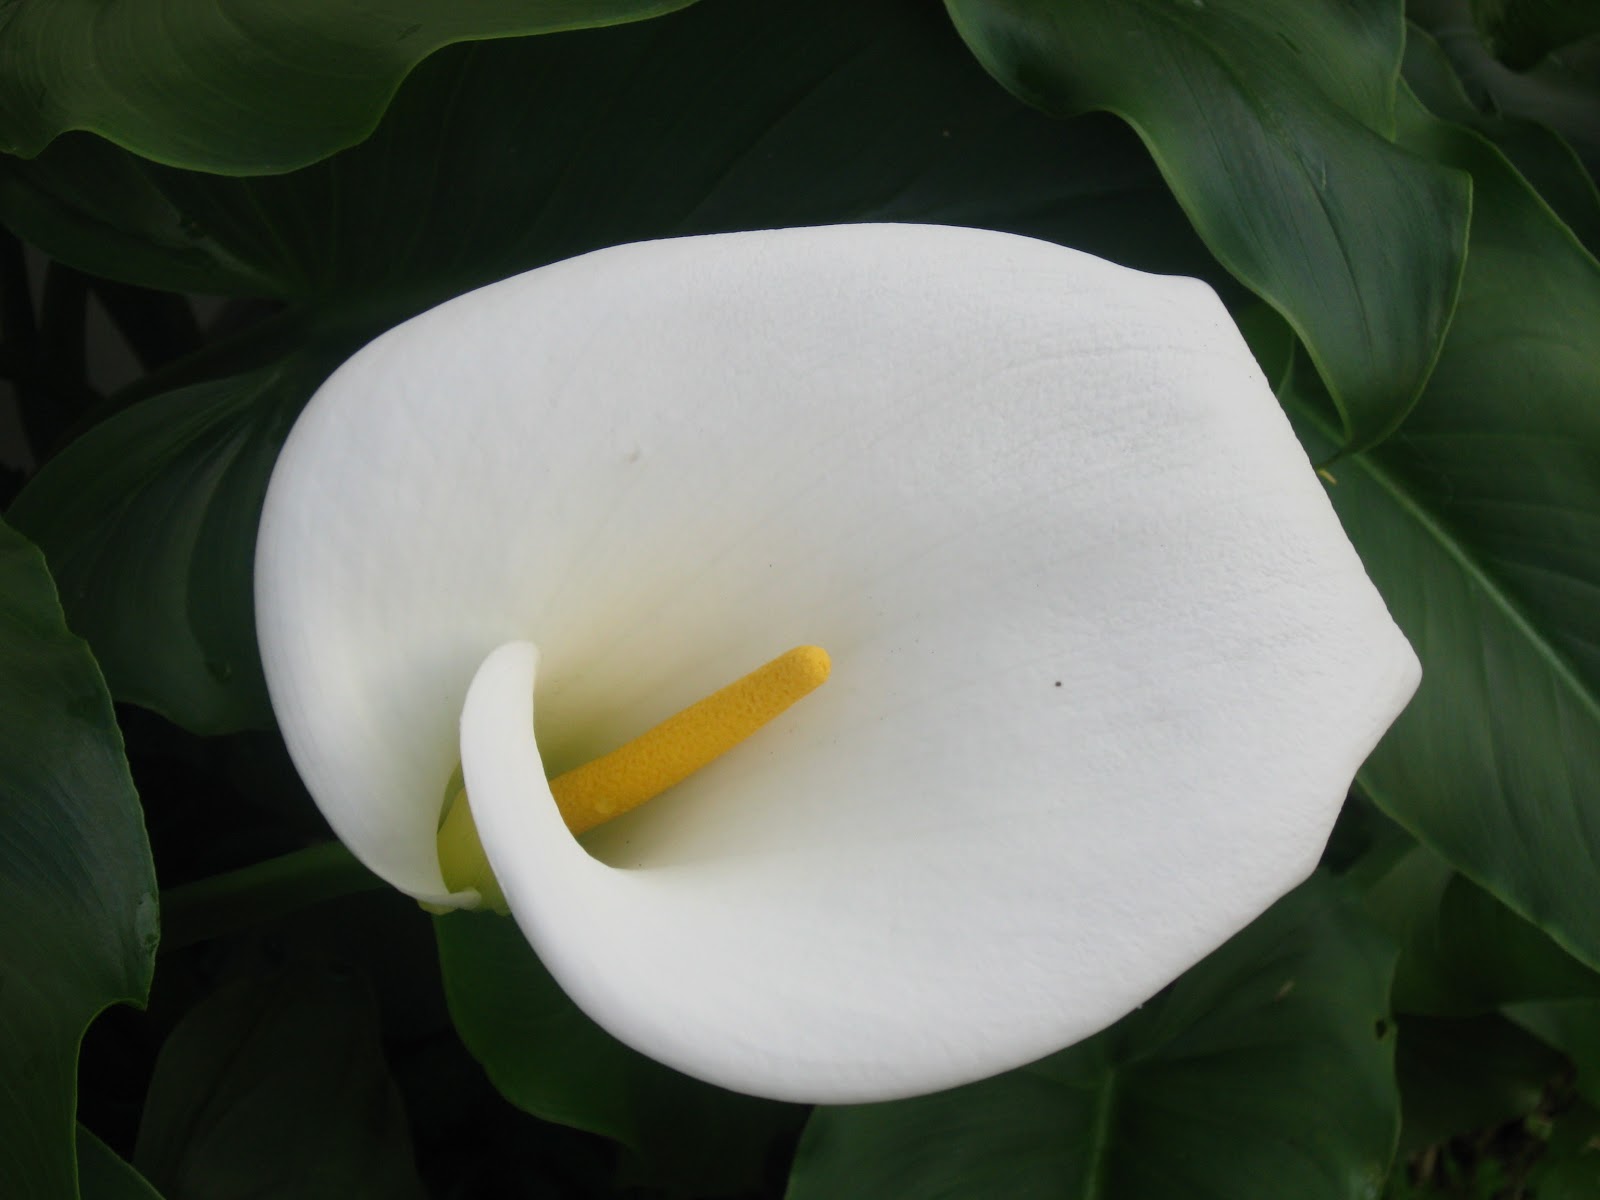 A Tuesday Night Memo: The many lovely faces of our calla lilies